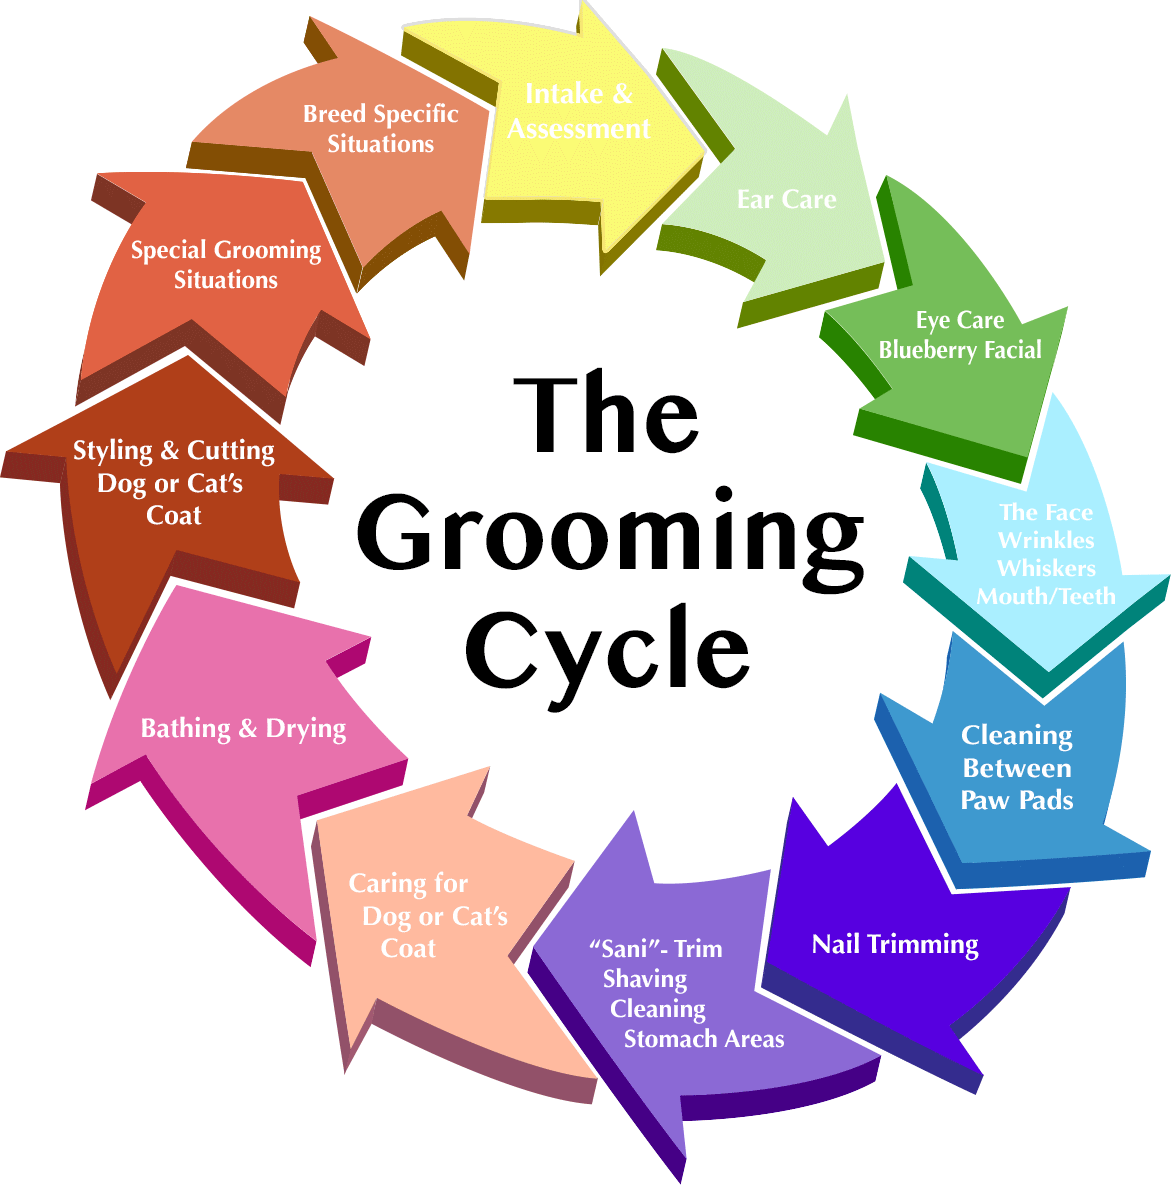 https://pamperedpawssd.com/wp-content/uploads/2020/08/GroomingCycleAnimated05.gif